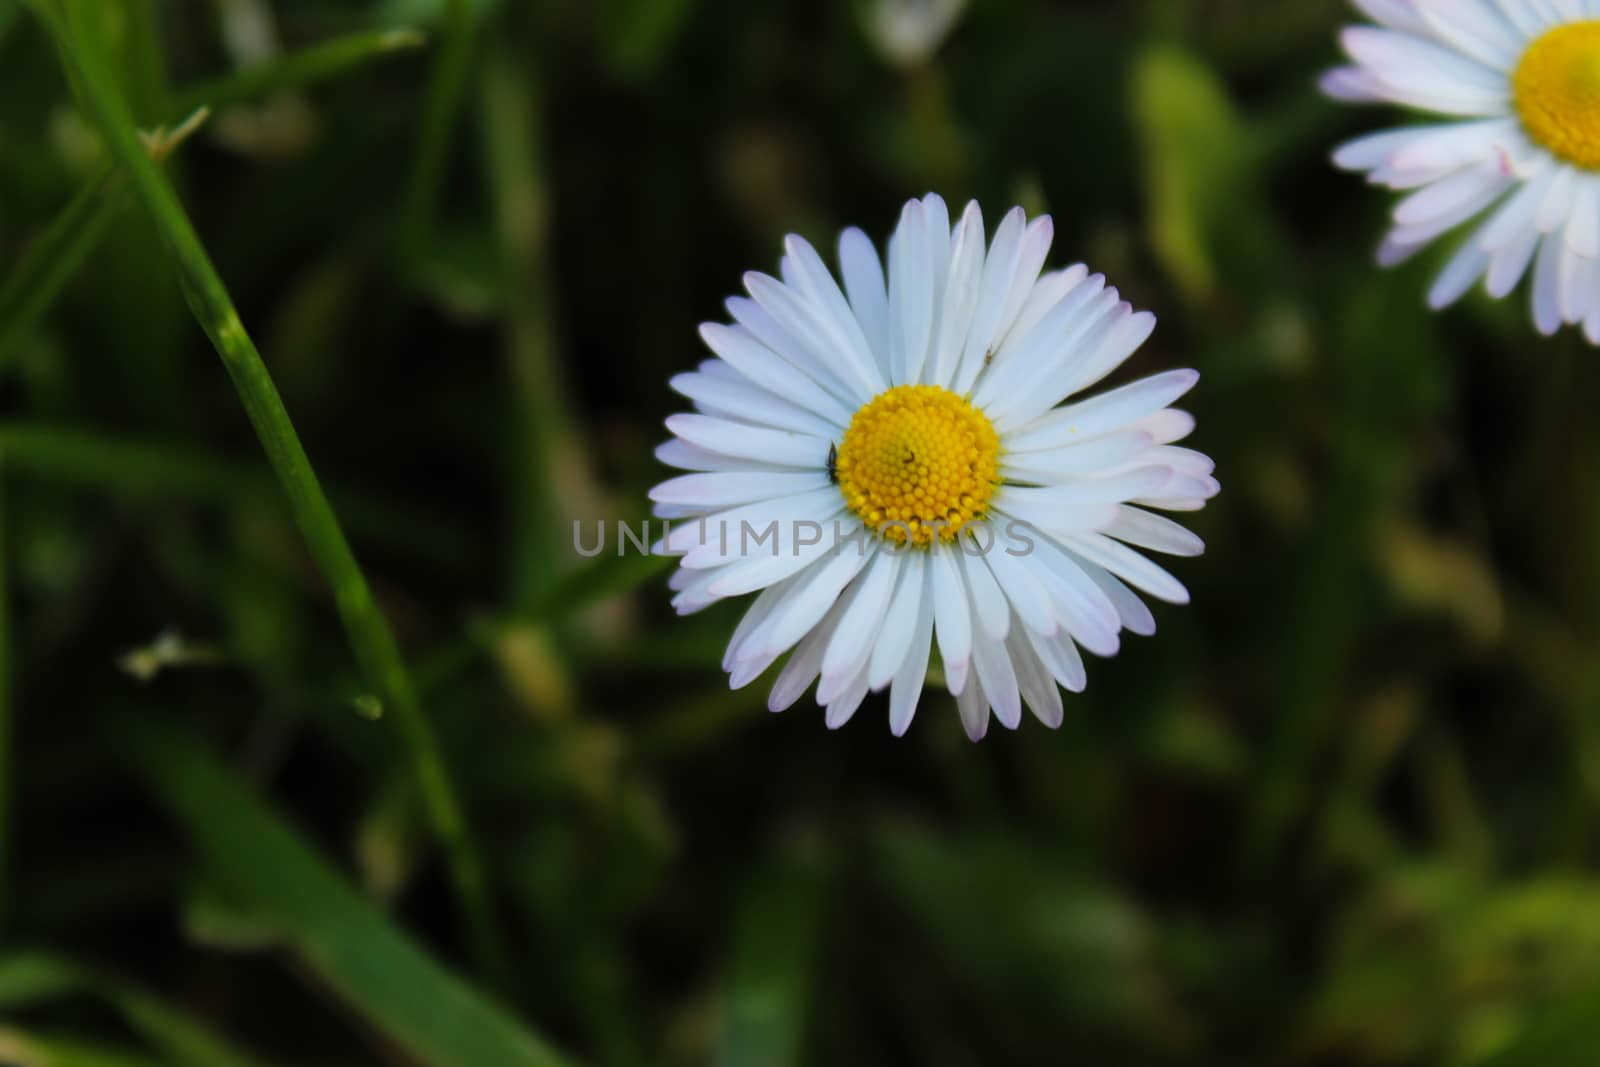 Bellis perenis, detailed white and yellow daisy flower in a green background. Beja, Portugal.